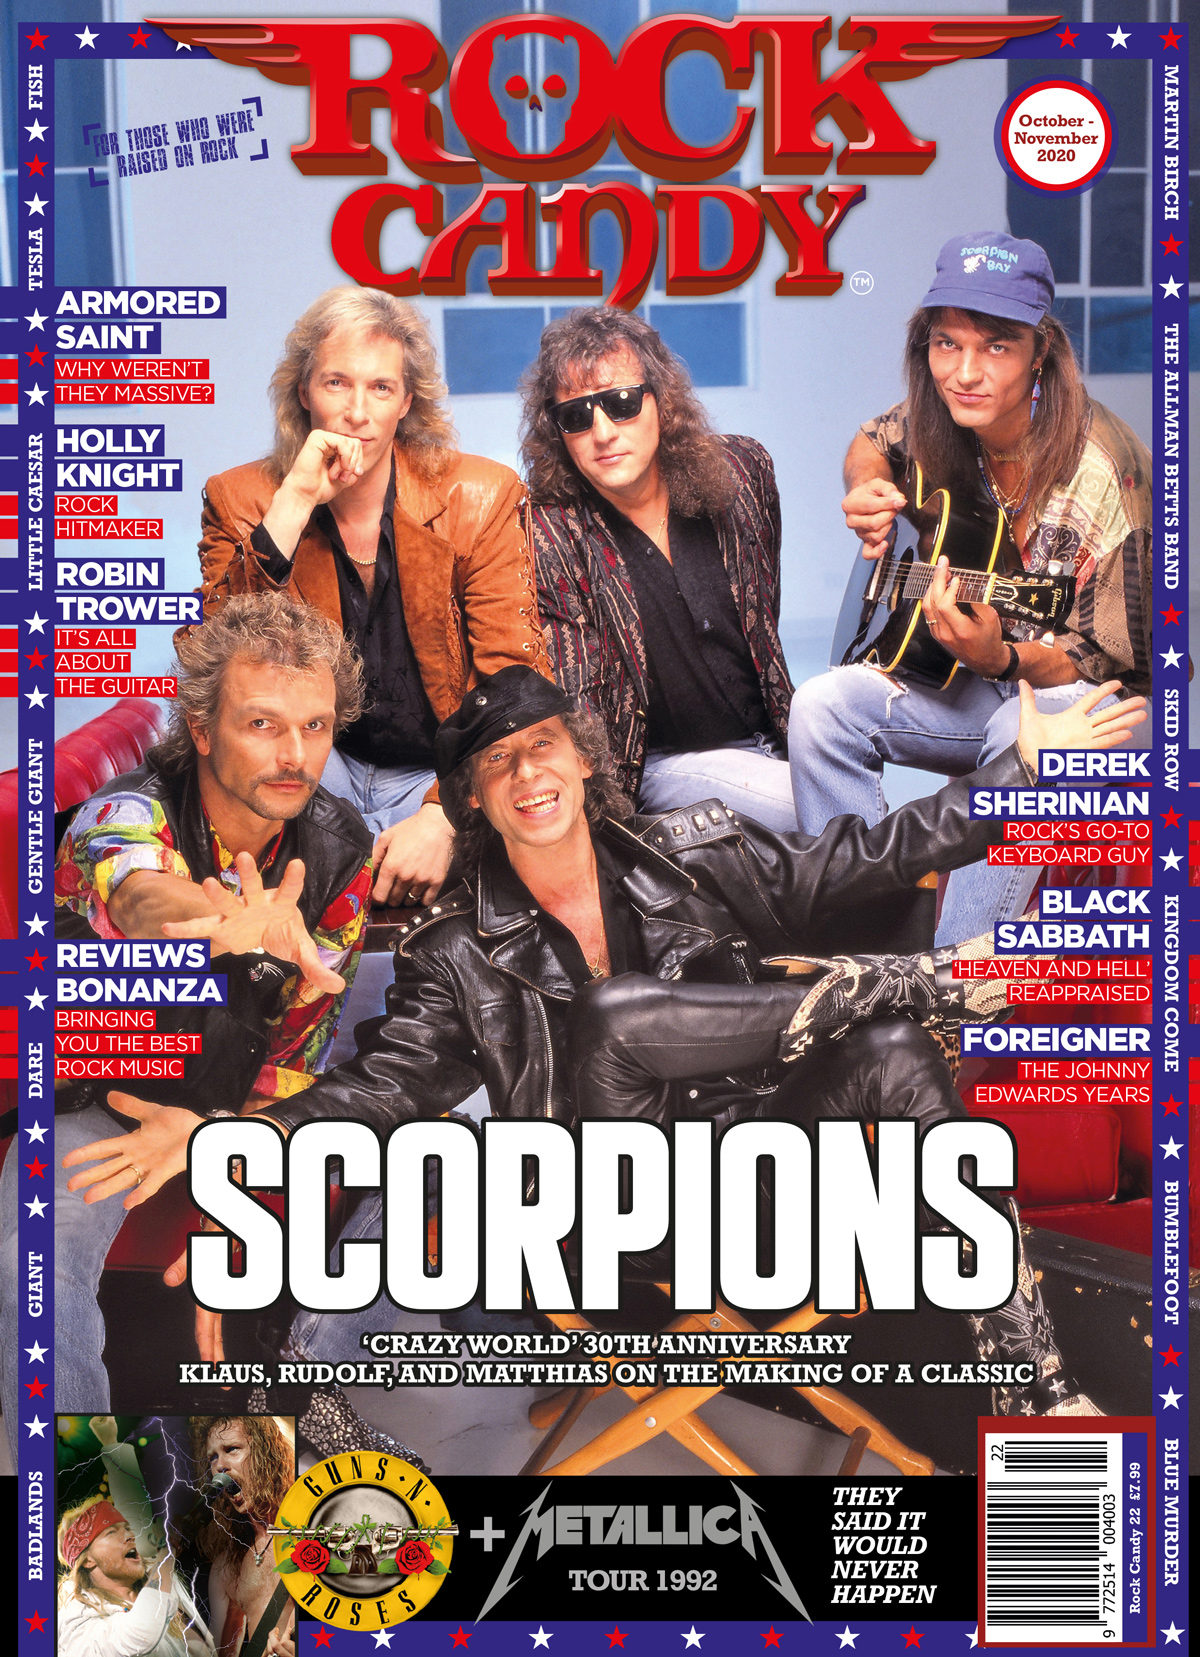 Issue 22 is available right now, featuring our mega-feature celebrating the 30th anniversary of the Scorpions classic ‘Crazy World’.